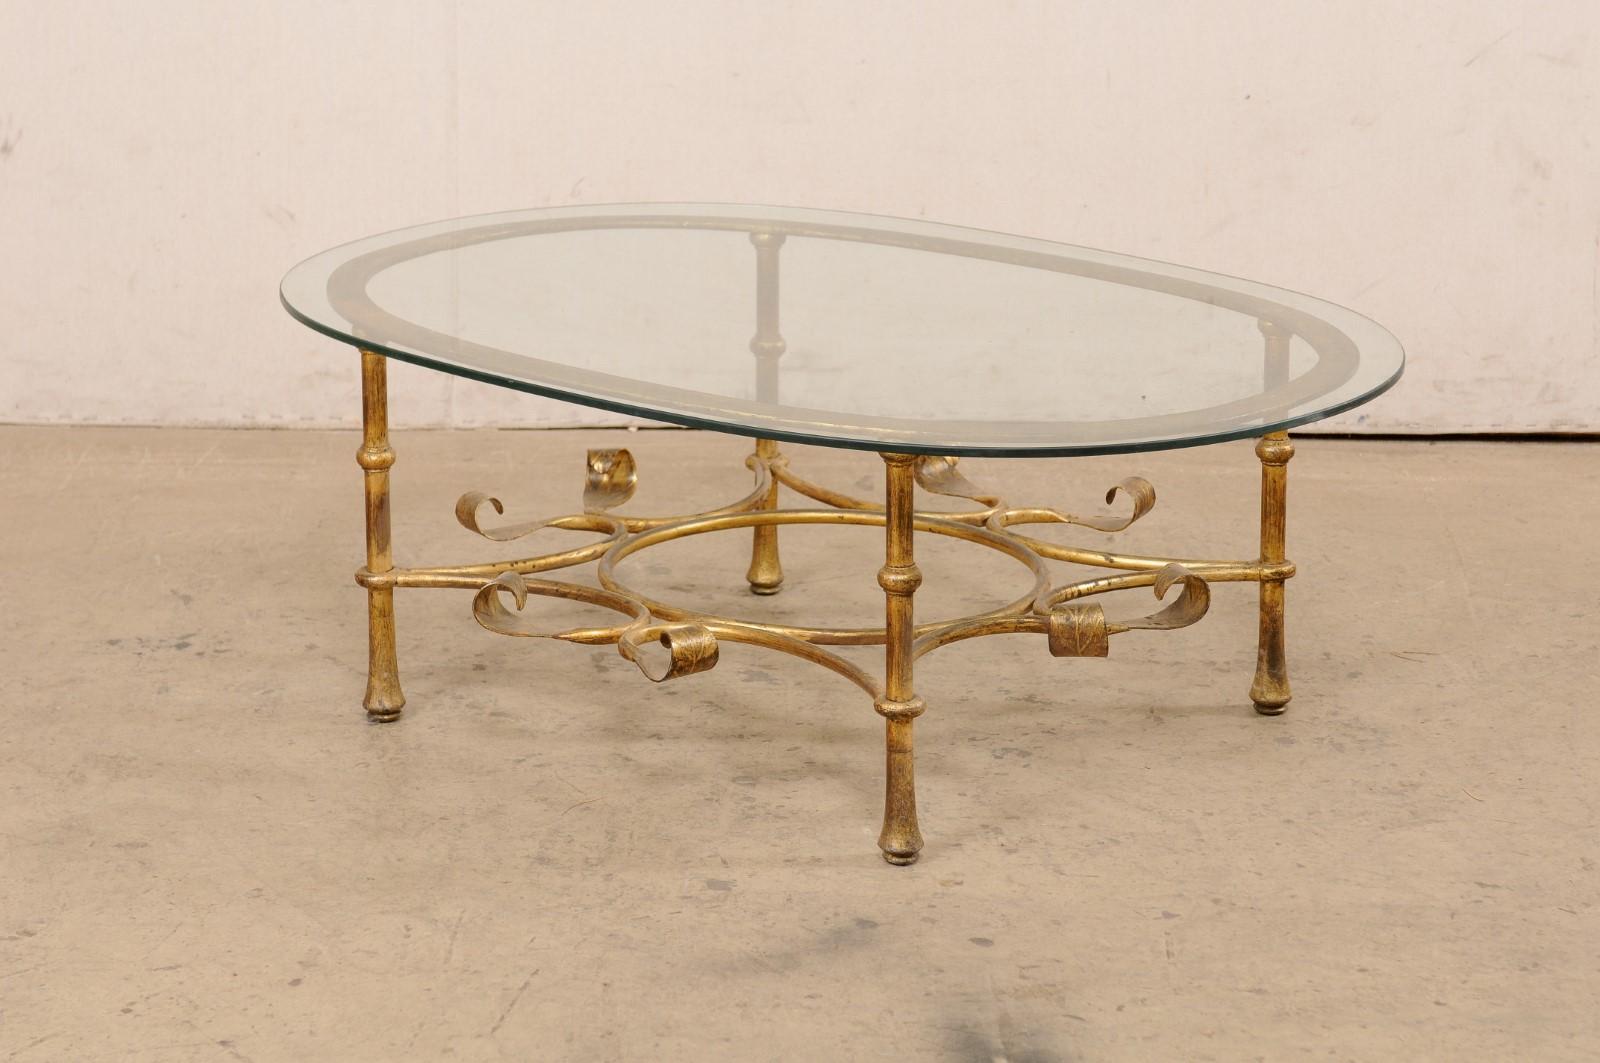 Spanish Oval Glass-Top Table with Iron Base (Gold Finish), Mid 20th C. 7